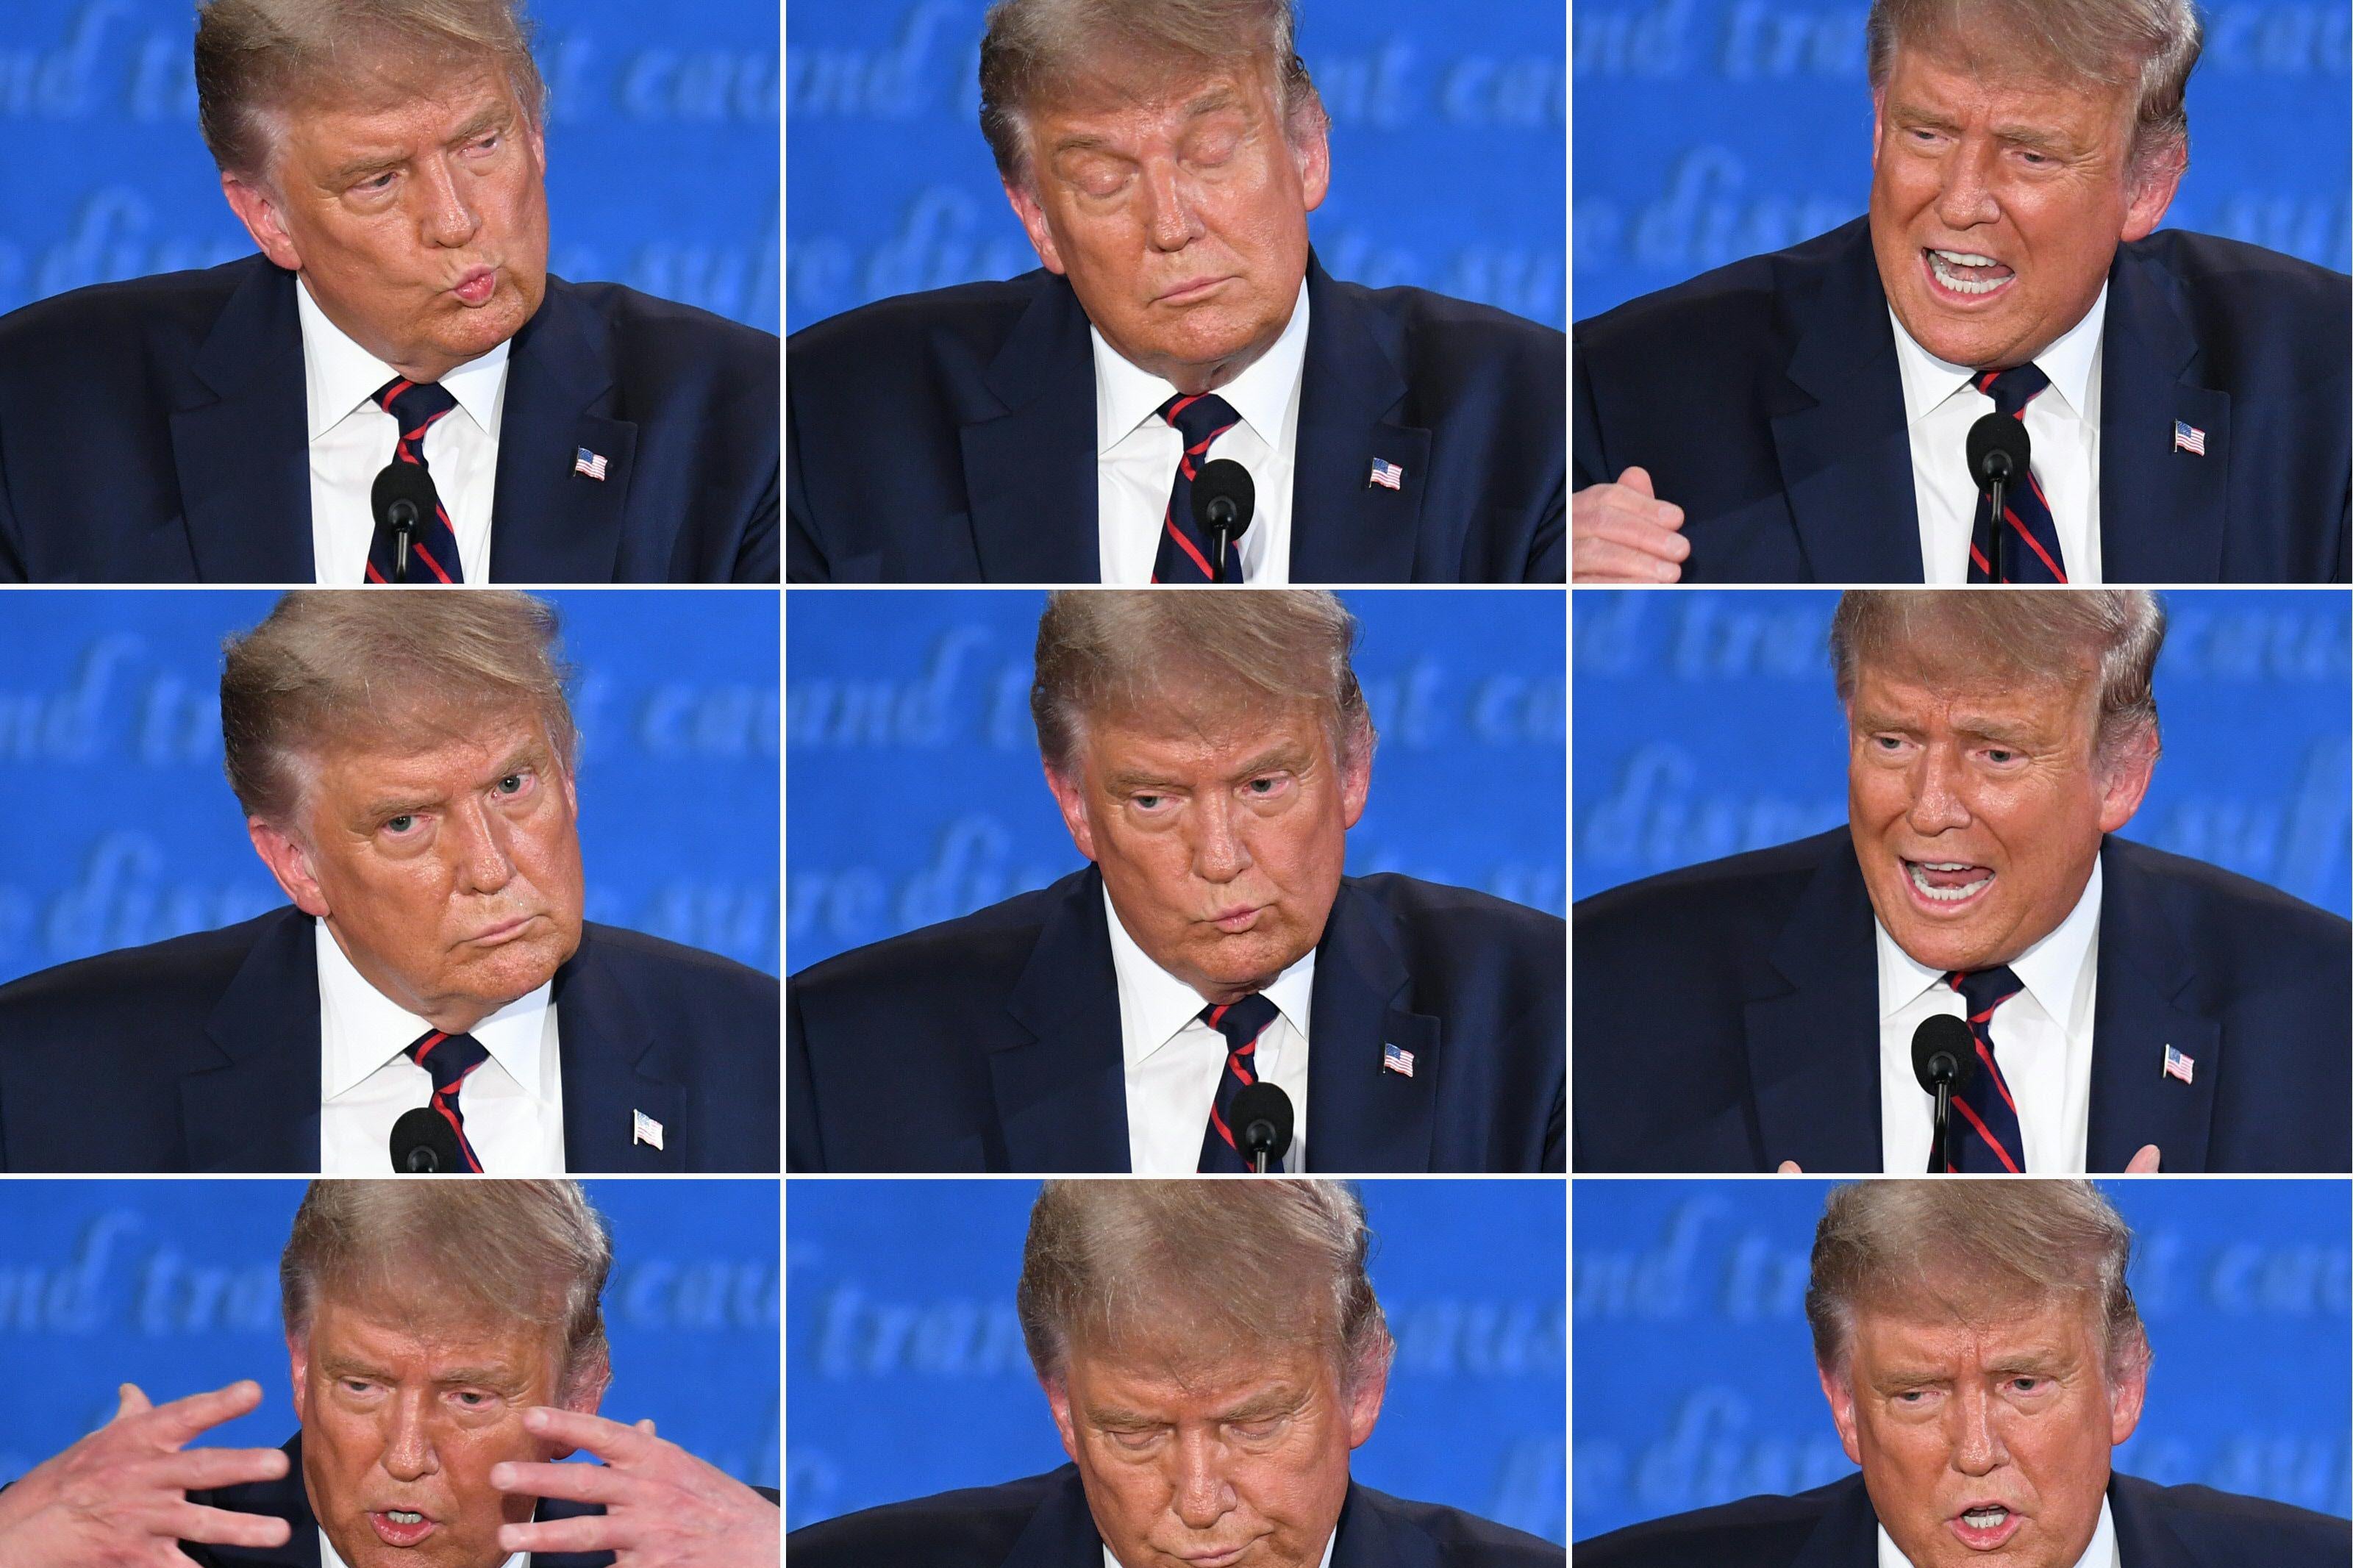 A grid of Donald Trump making many facial expressions during the debate.